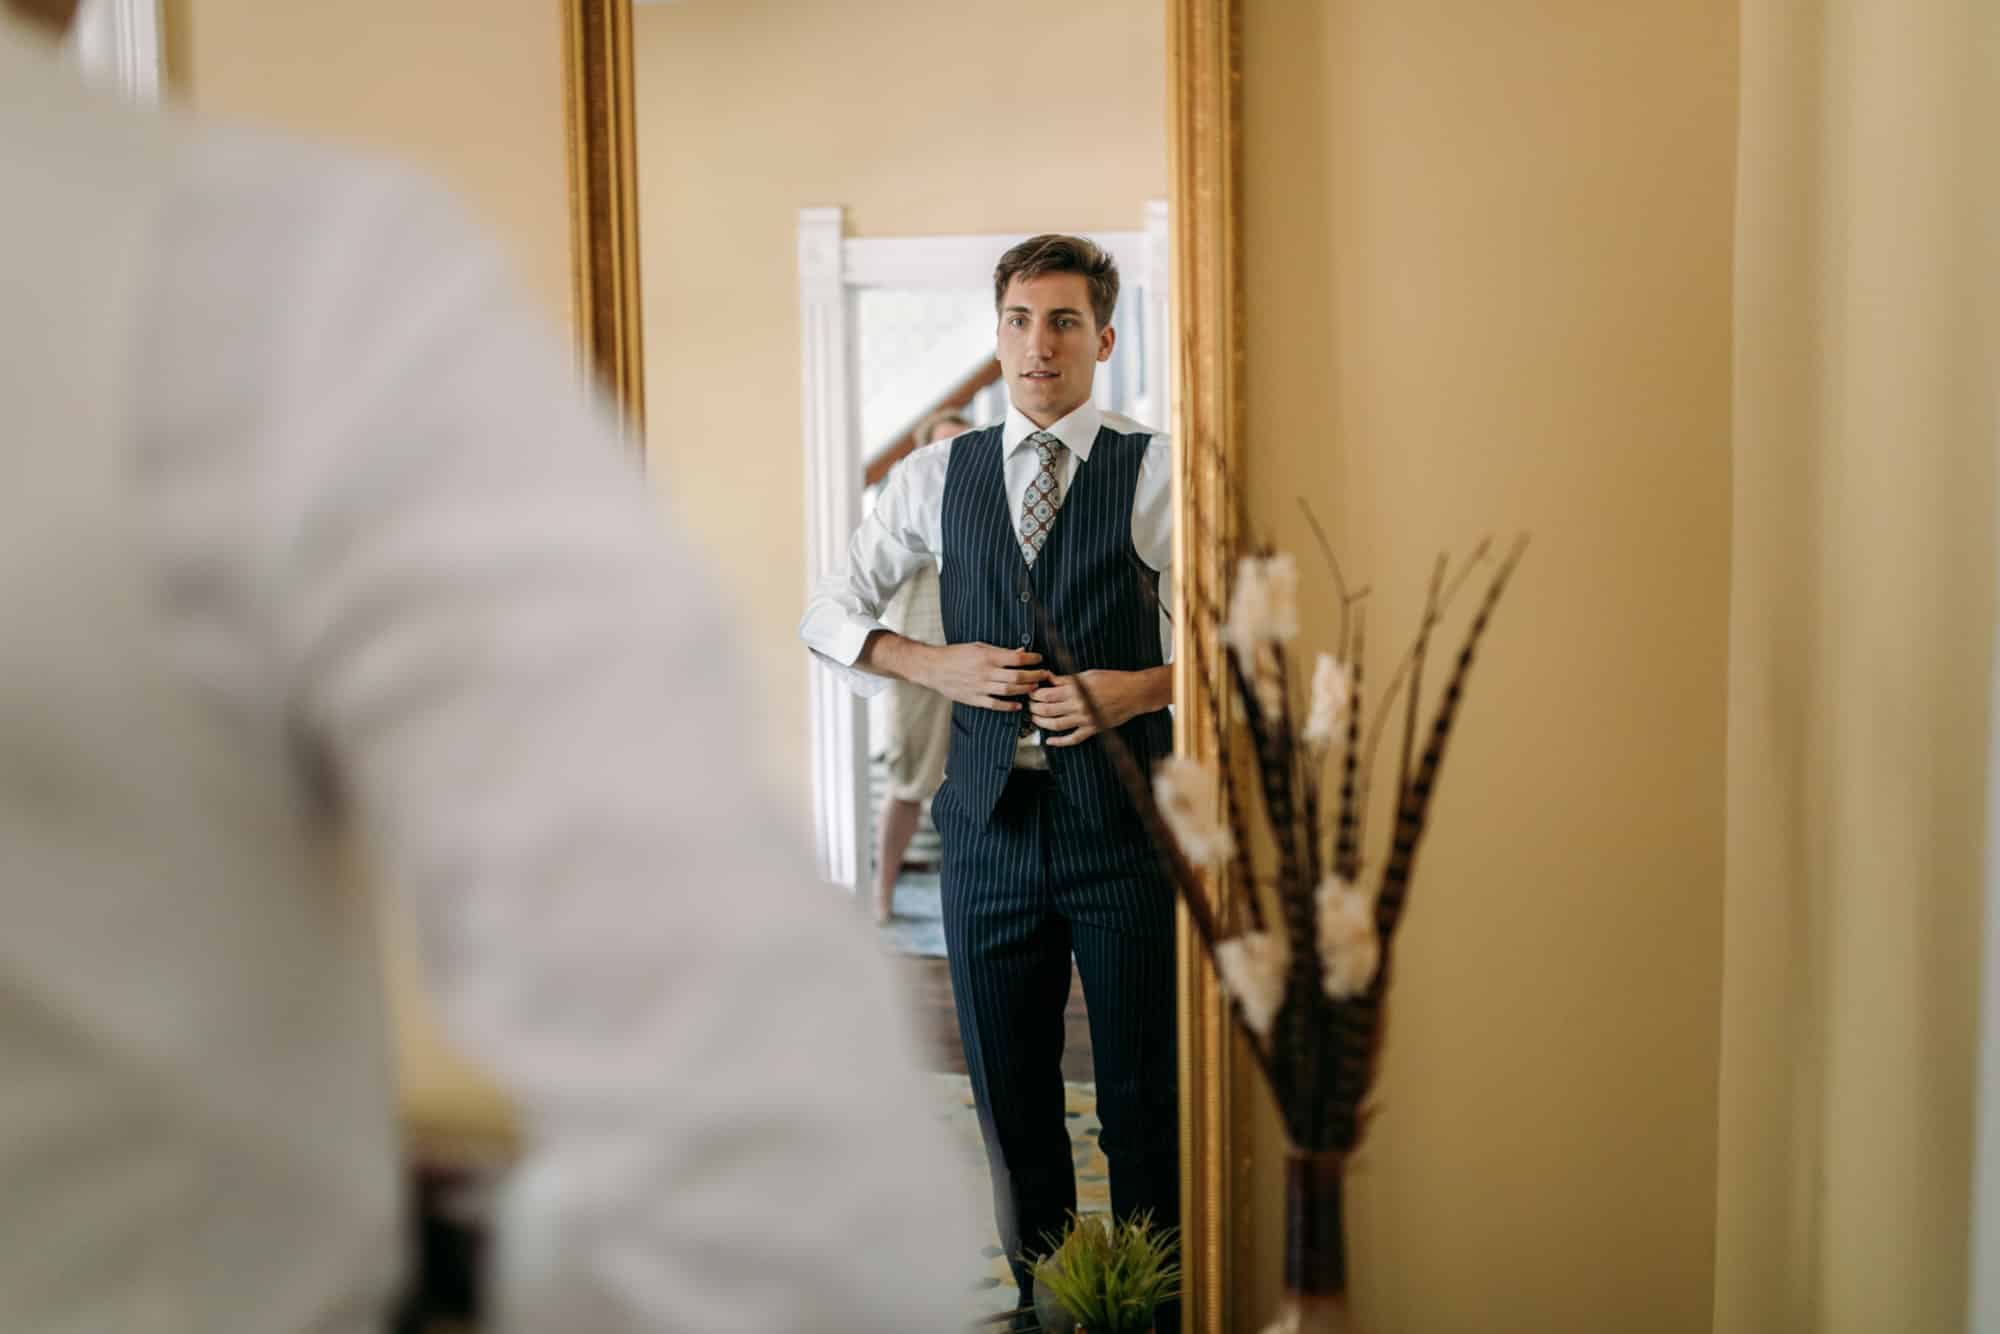 groom getting ready, getting ready at airbnb, groom tie ideas, groom tie, groom getting ready by himself, groom getting ready alone, groom in vest, mens dress shoes